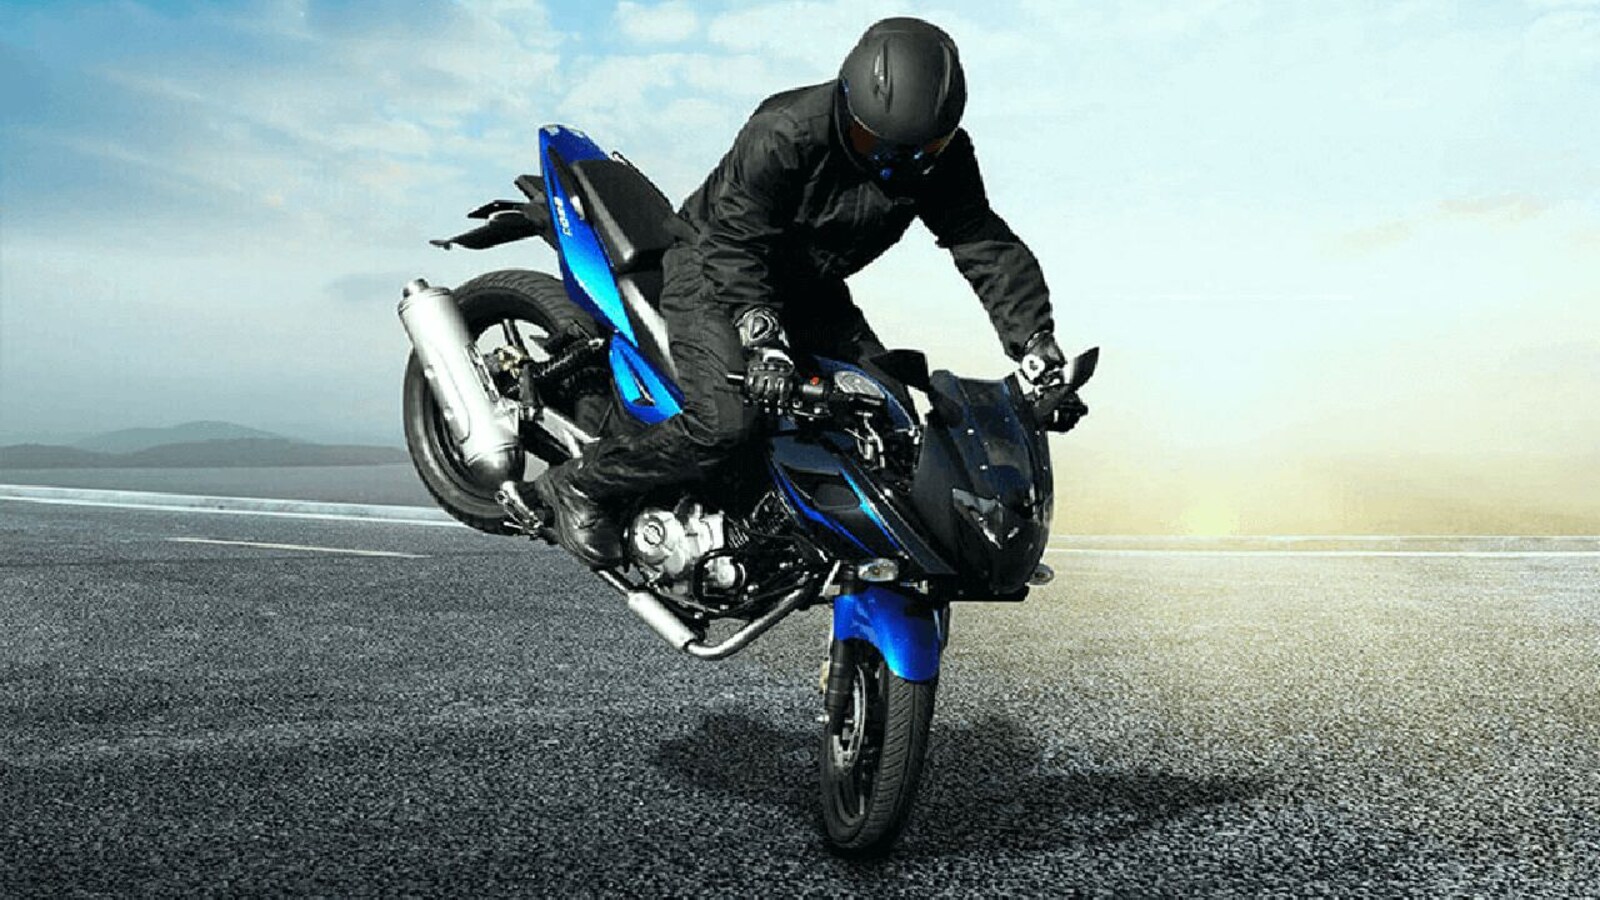 Upcoming Bajaj Pulsar 250: What changes can we expect